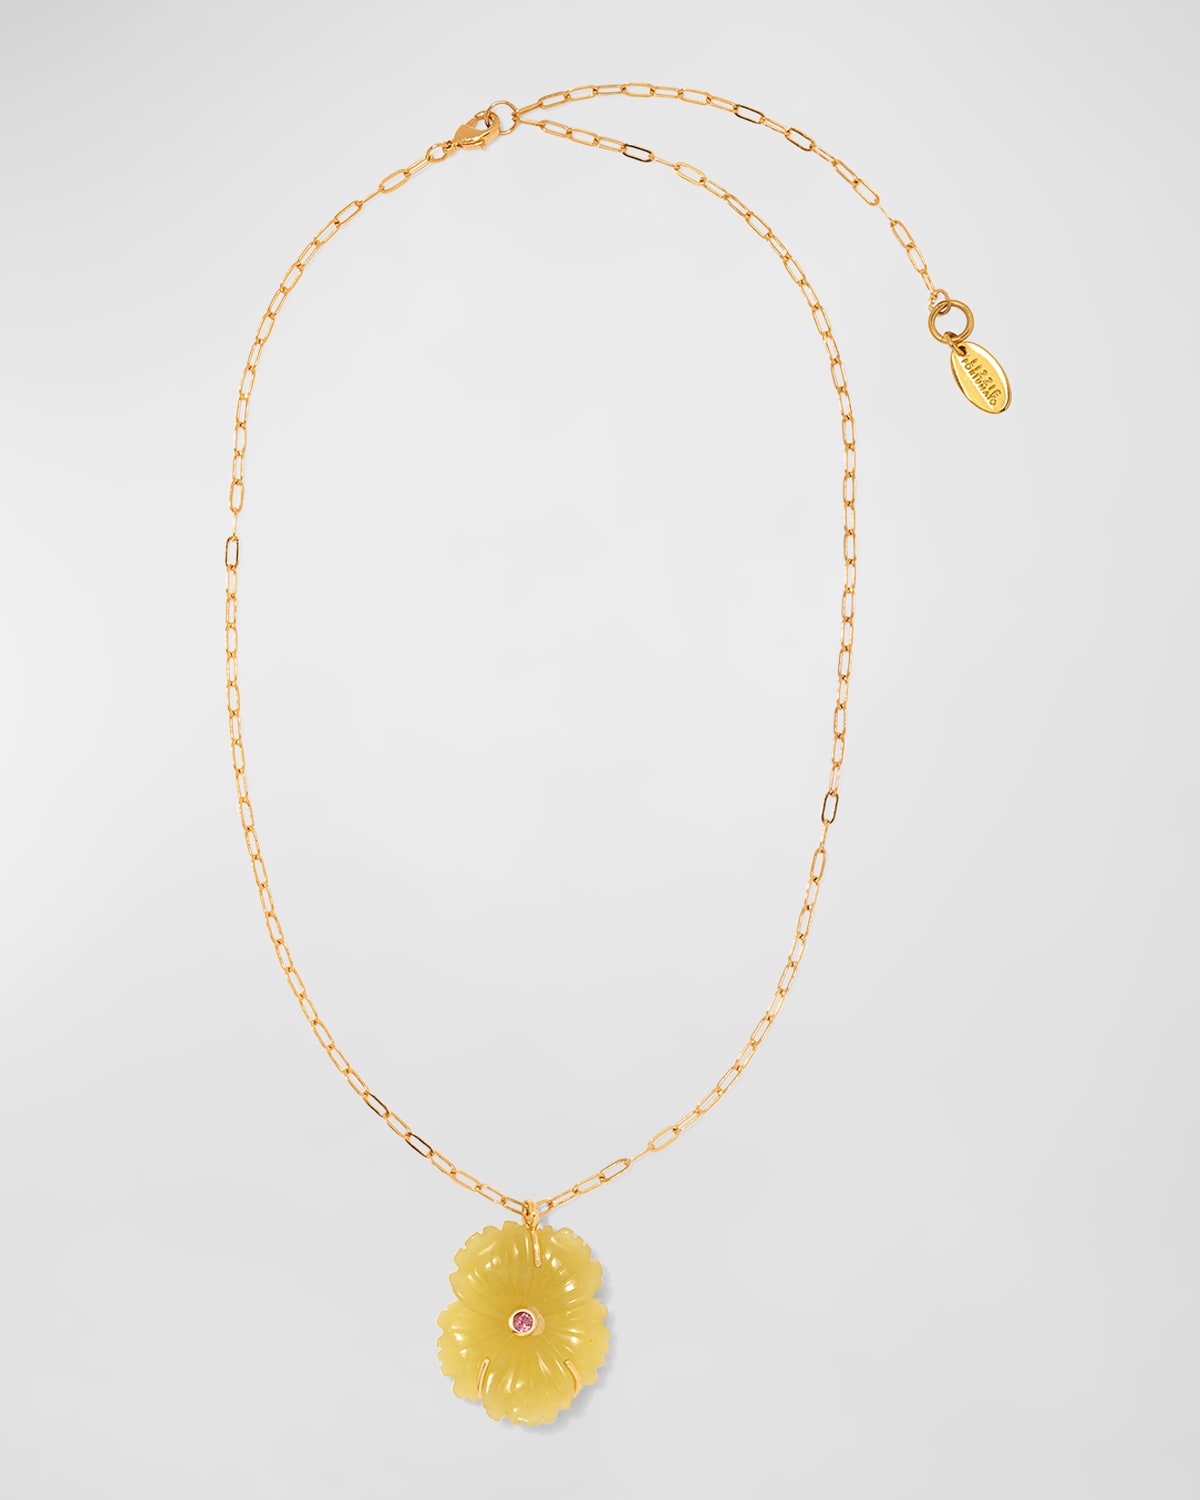 NEW BLOOM NECKLACE IN CANARY